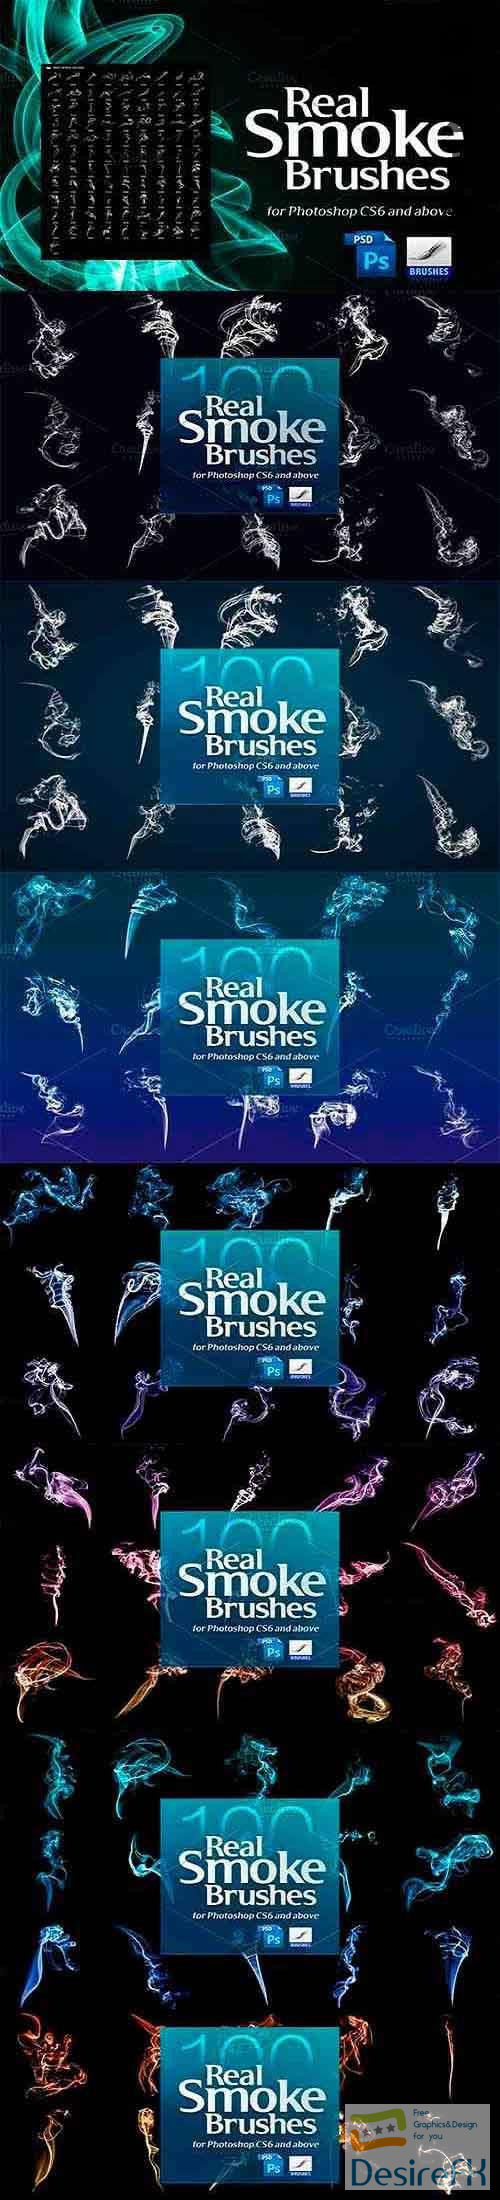 100 Real Smoke Brushes for Photoshop 4904310